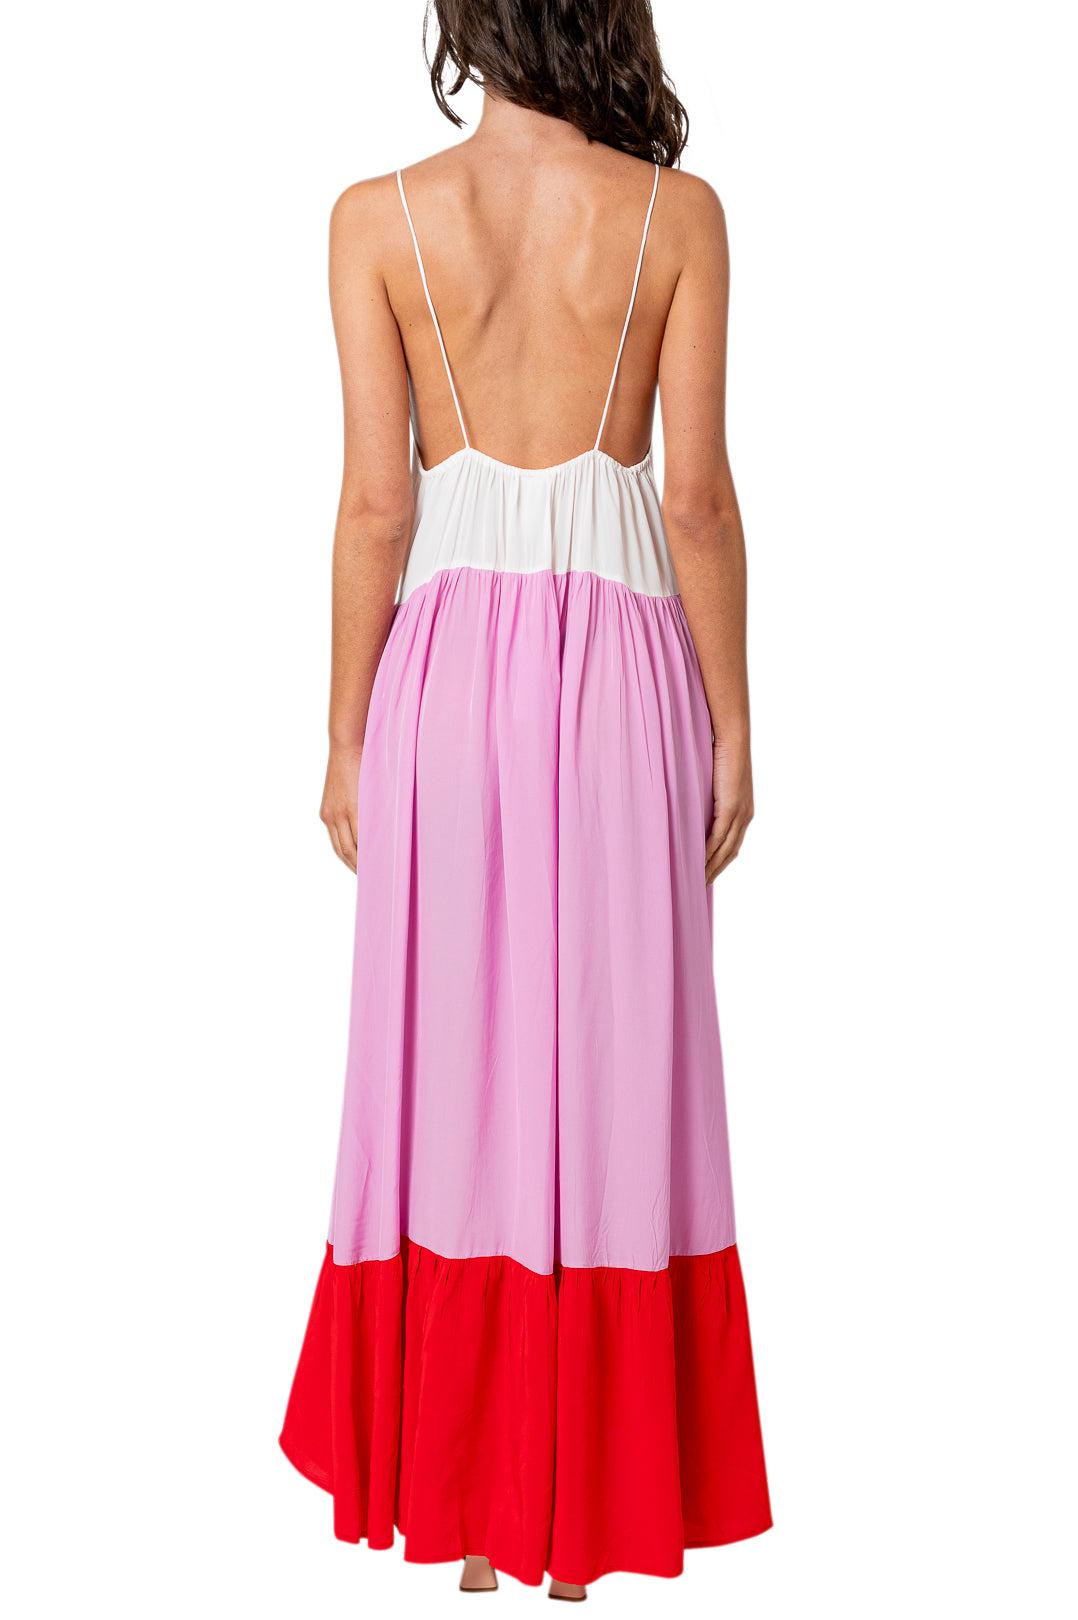 Evarae-Rouched Long Dress-dgallerystore